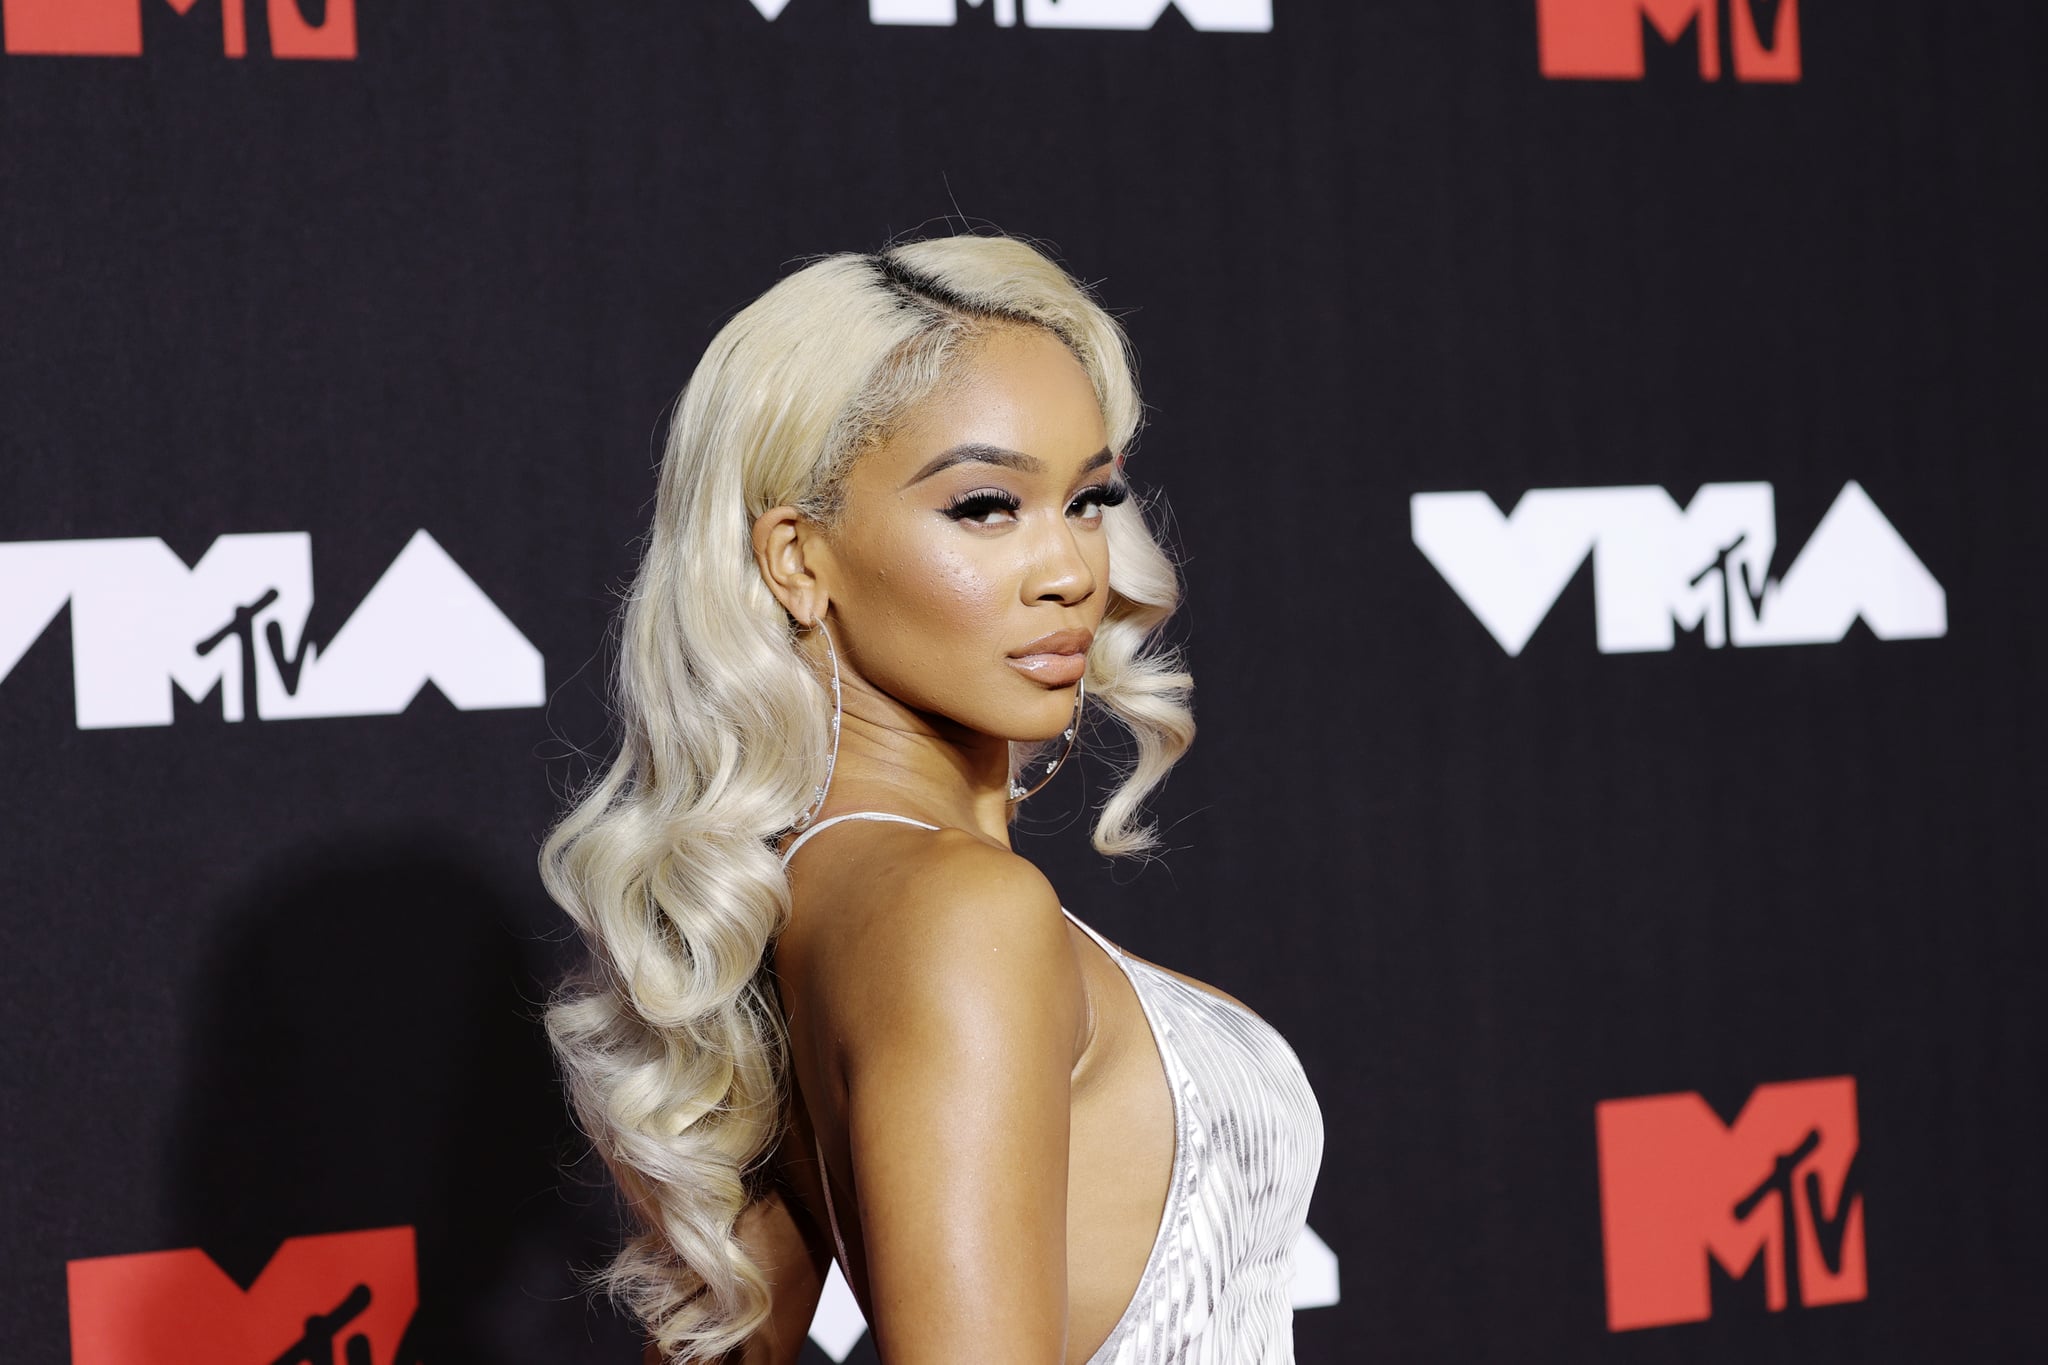 NEW YORK, NEW YORK - SEPTEMBER 12: Saweetie attends the 2021 MTV Video Music Awards at Barclays Center on September 12, 2021 in the Brooklyn borough of New York City. (Photo by Jamie McCarthy/Getty Images for MTV/ ViacomCBS)